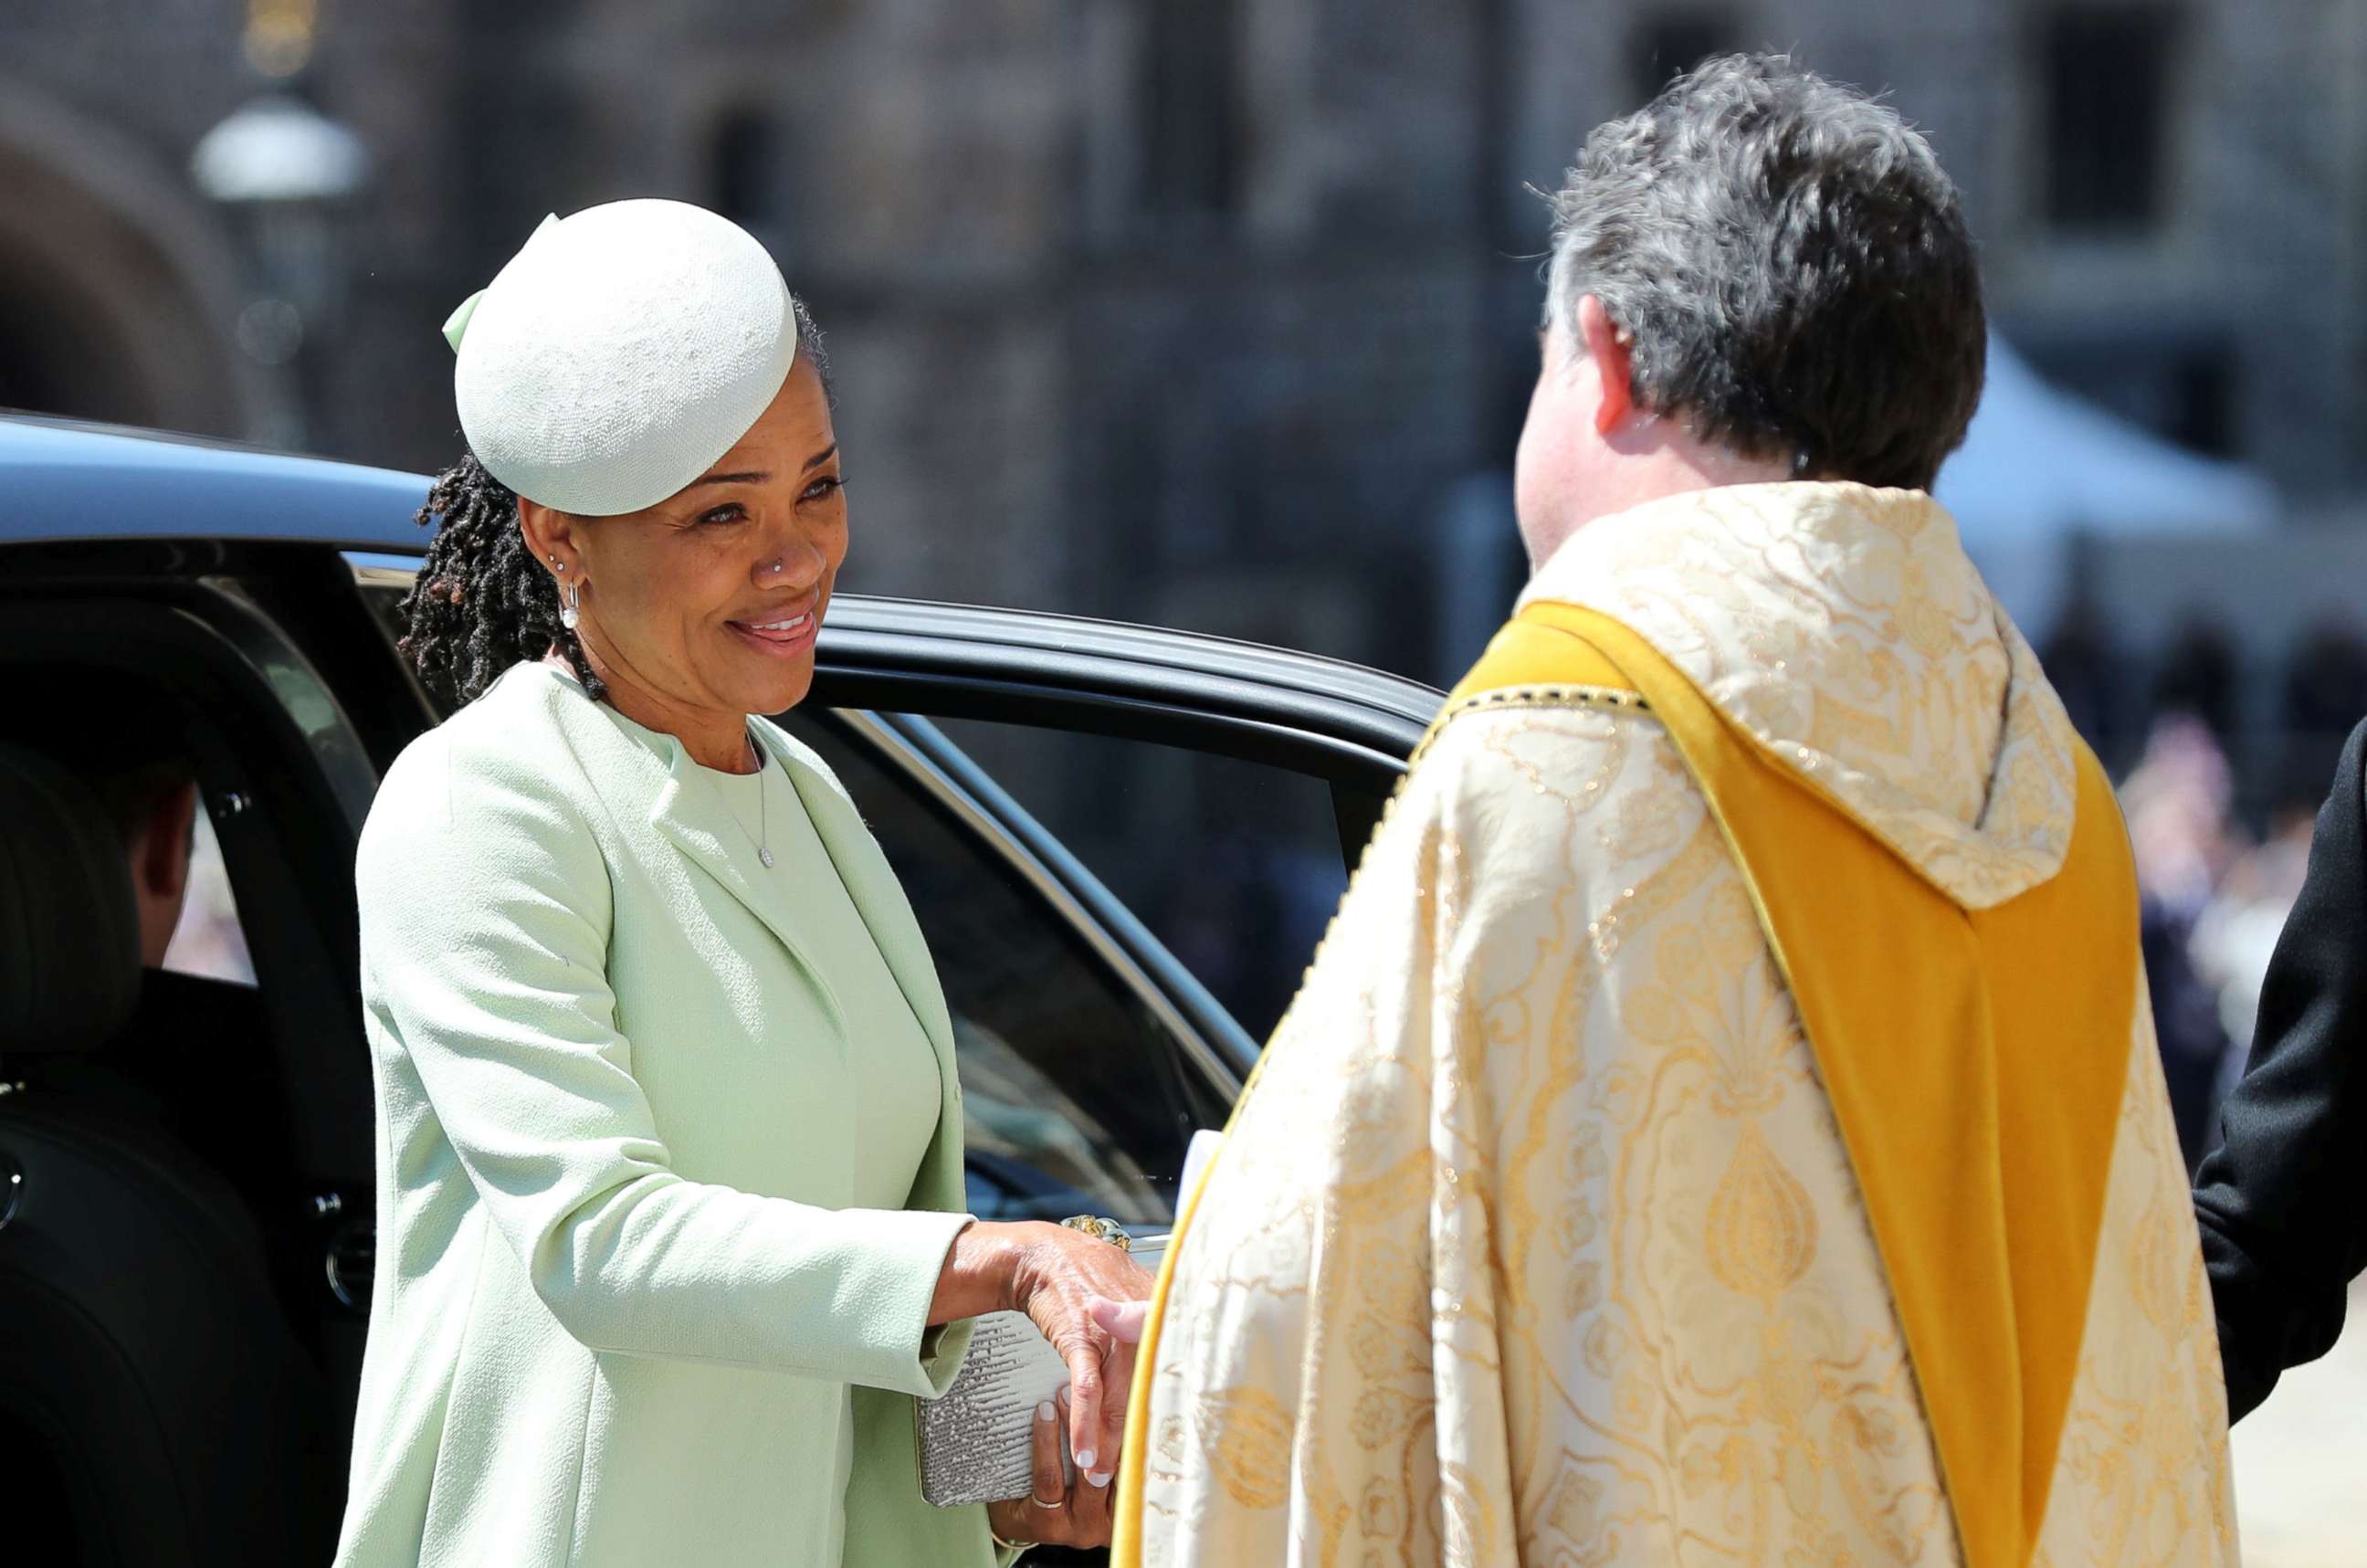 PHOTO: Doria Ragland arrives at St George's Chapel at Windsor Castle for the wedding of Meghan Markle and Prince Harry in Windsor, May 19, 2018.